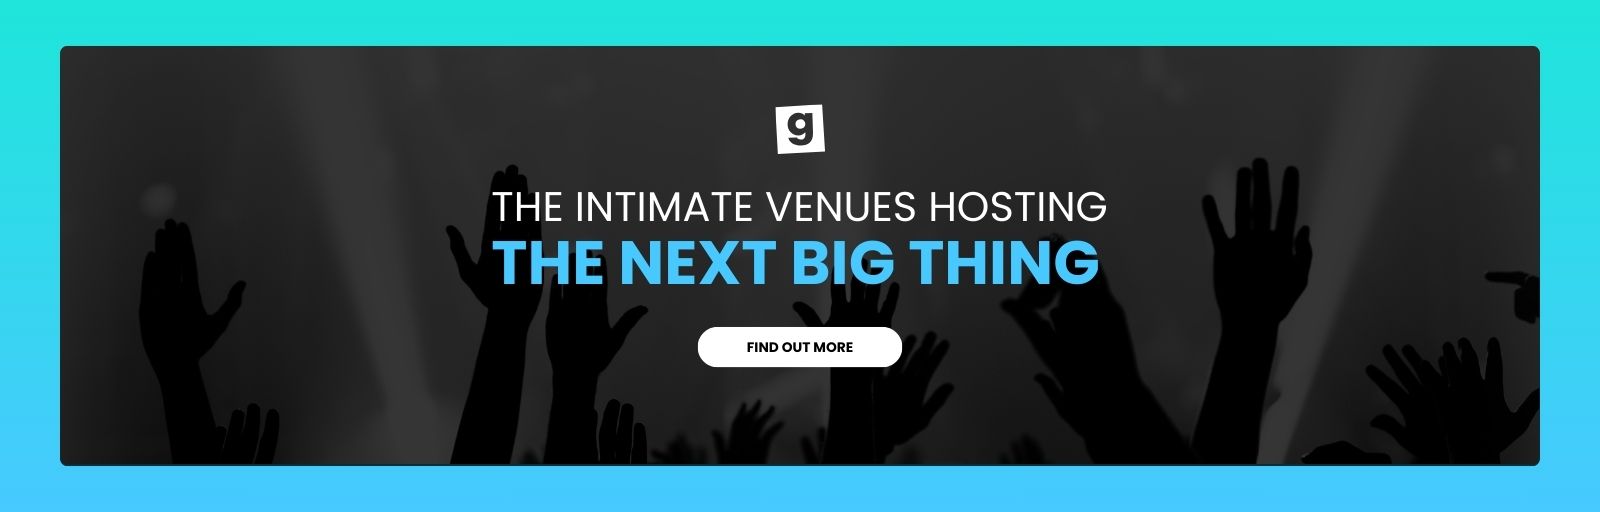 INTIMATE VENUES HOSTING THE NEXT BIG THING